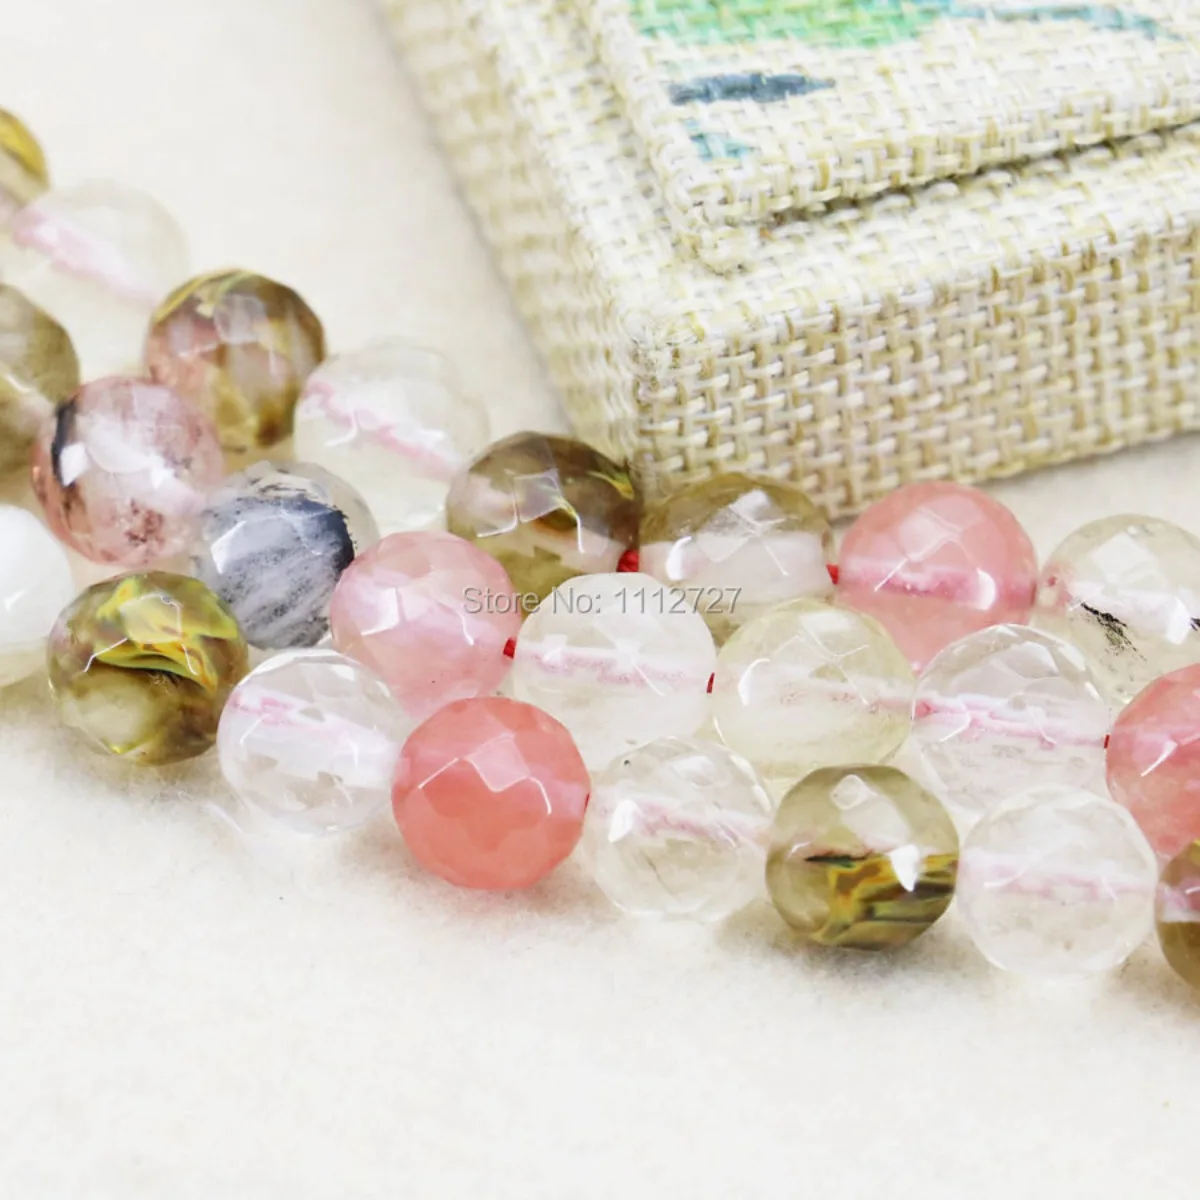 

10mm Multicolor Watermelon Tourmaline Round Beads Accessory Craft Loose Beads Semi Finished Stone Faceted Jewelry Making Fitting